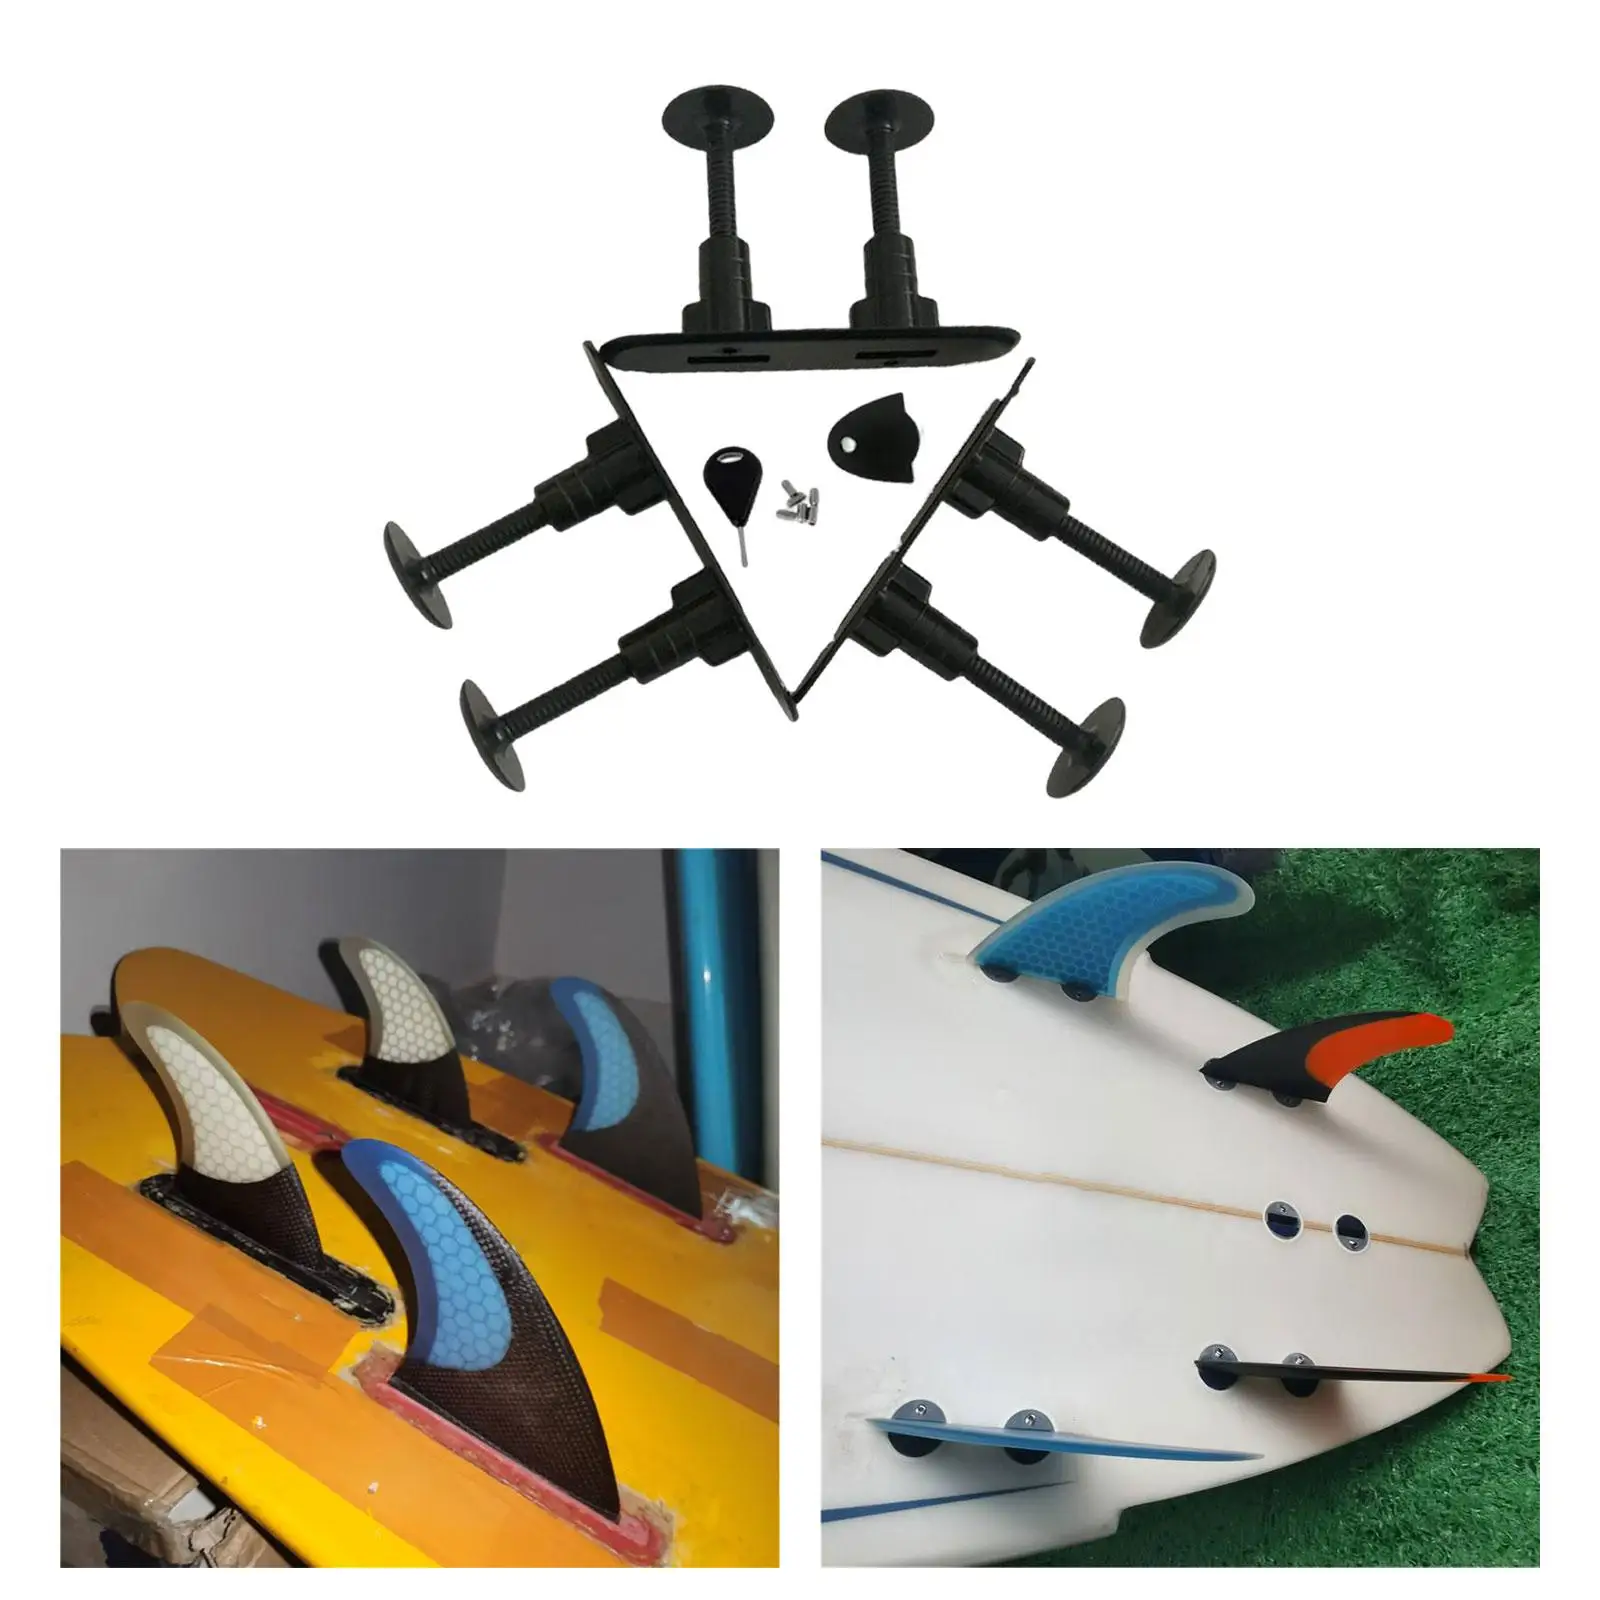 3x Surfboard Fin Plugs Surfboard Fin Boxes Install Base Black PVC Paddleboard